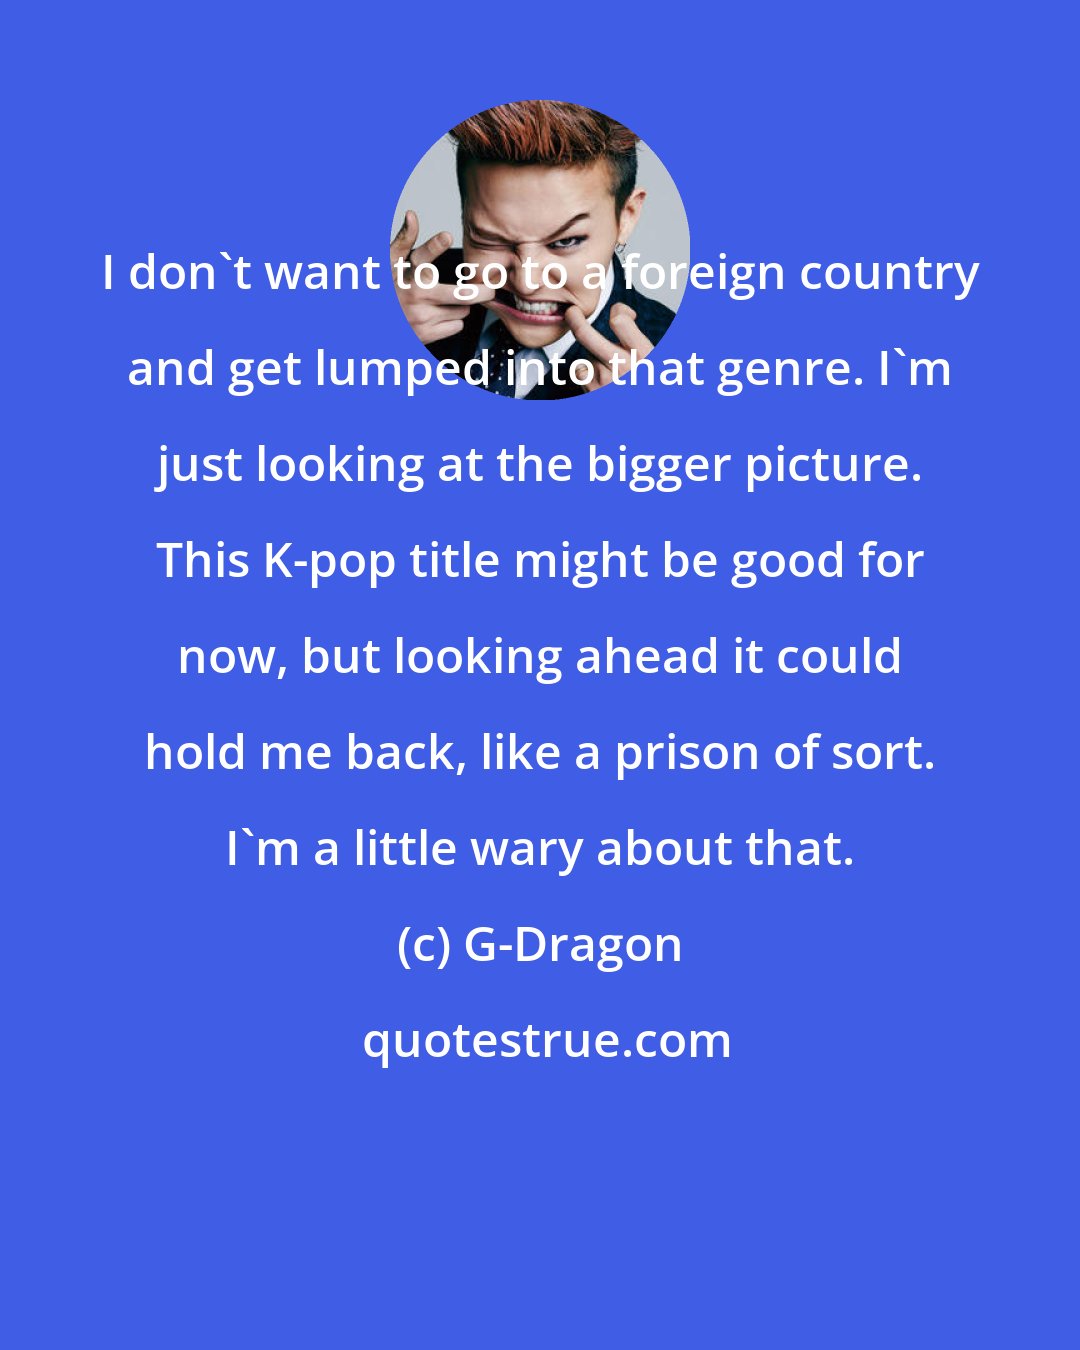 G-Dragon: I don't want to go to a foreign country and get lumped into that genre. I'm just looking at the bigger picture. This K-pop title might be good for now, but looking ahead it could hold me back, like a prison of sort. I'm a little wary about that.